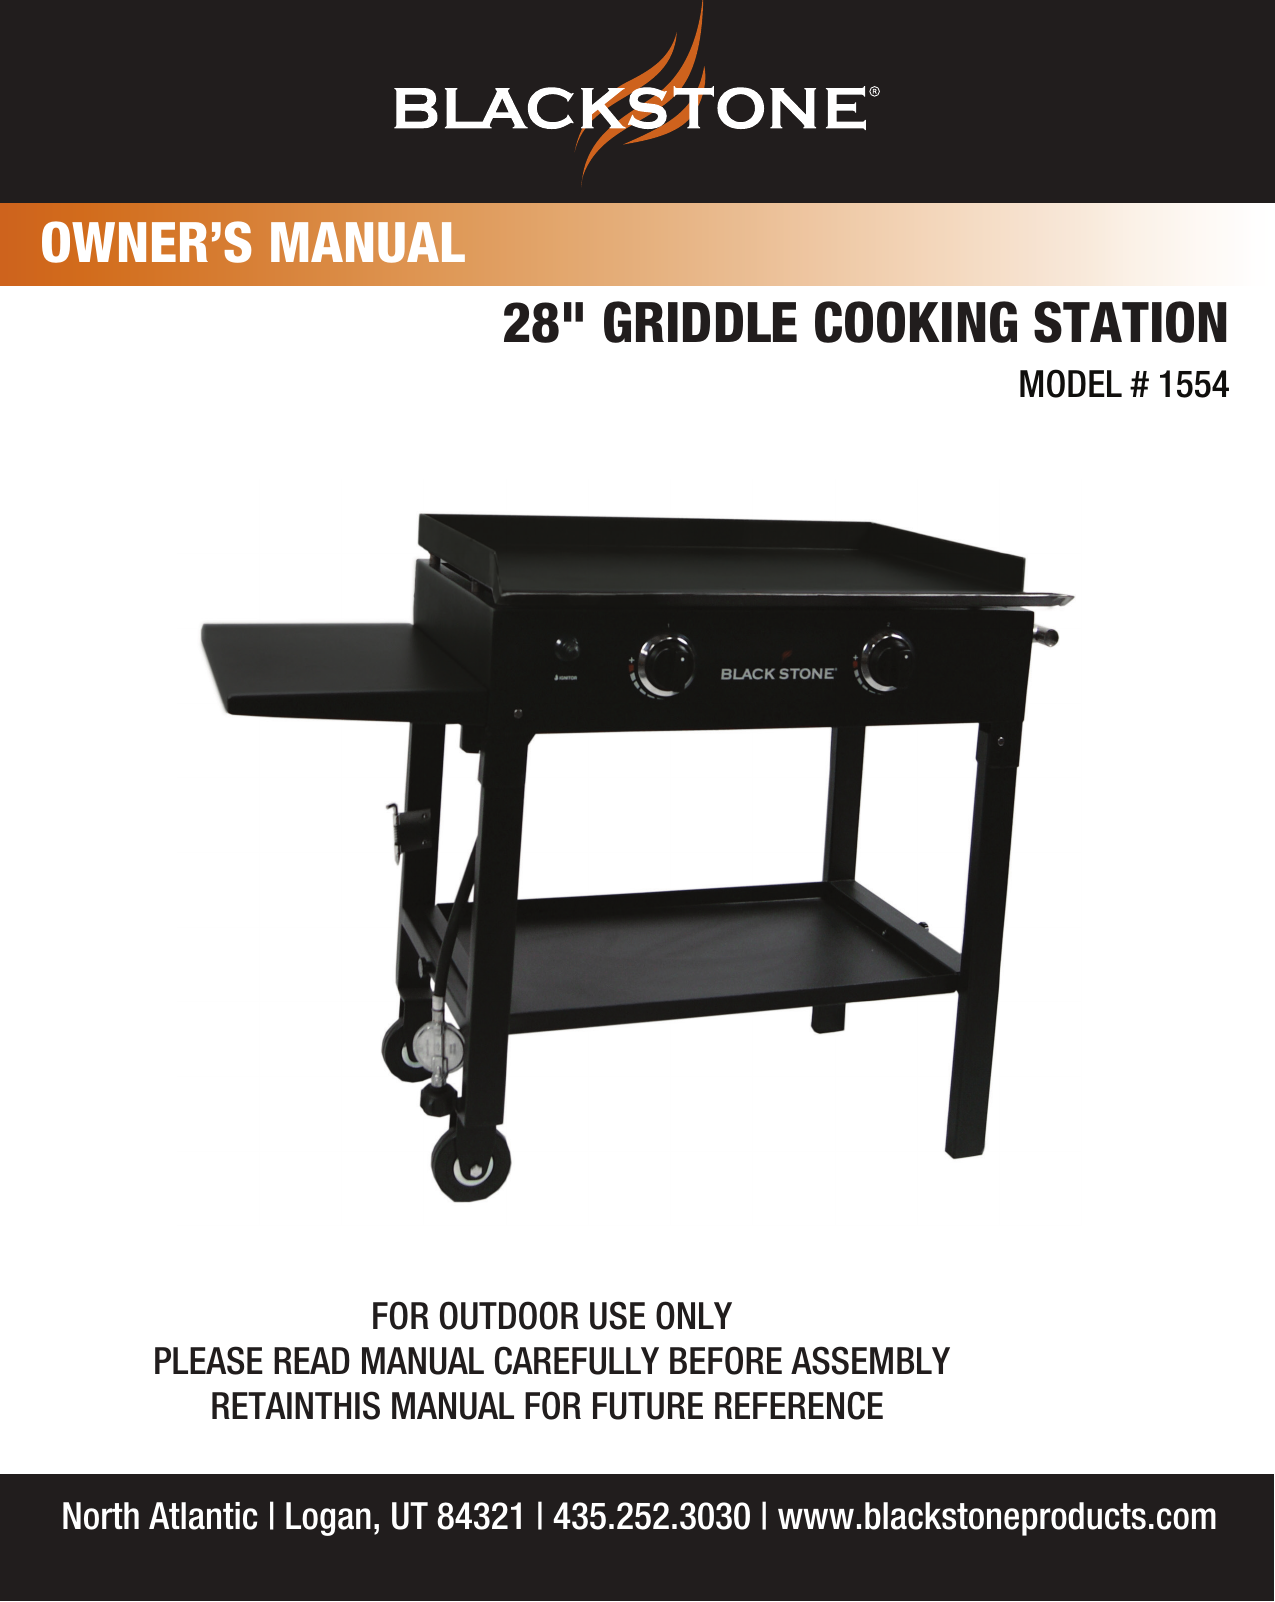 Page 1 of 11 - The-Blackstone-Grill The-Blackstone-Grill-28-Griddle-Cooking-Station-1554-Users-Manual 28 Inch Griddle Manualx